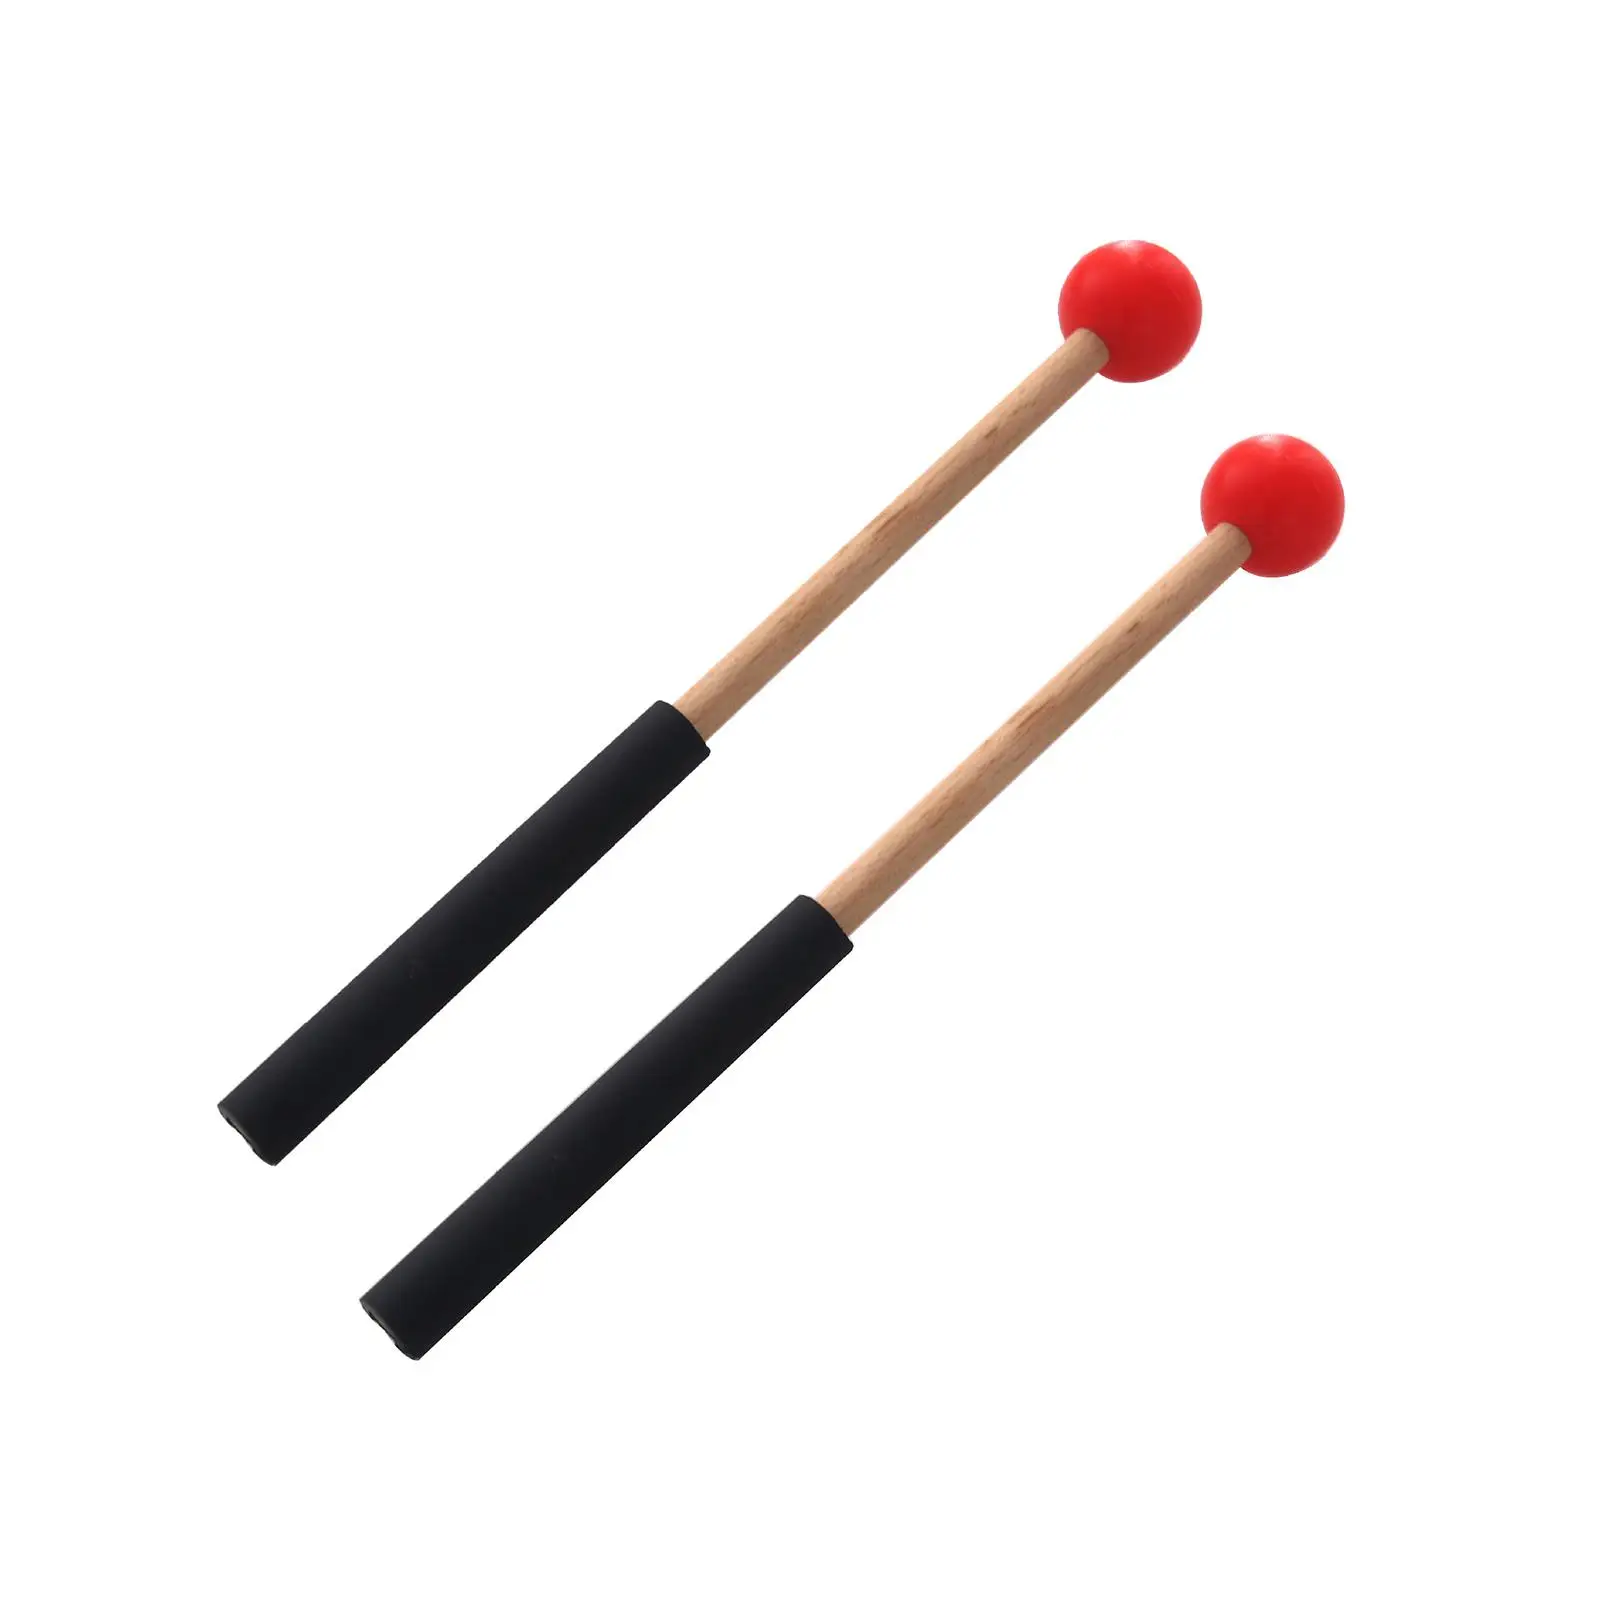 2x Wood Percussion Sticks Musical Drumstick with Wood Handle for Marimba